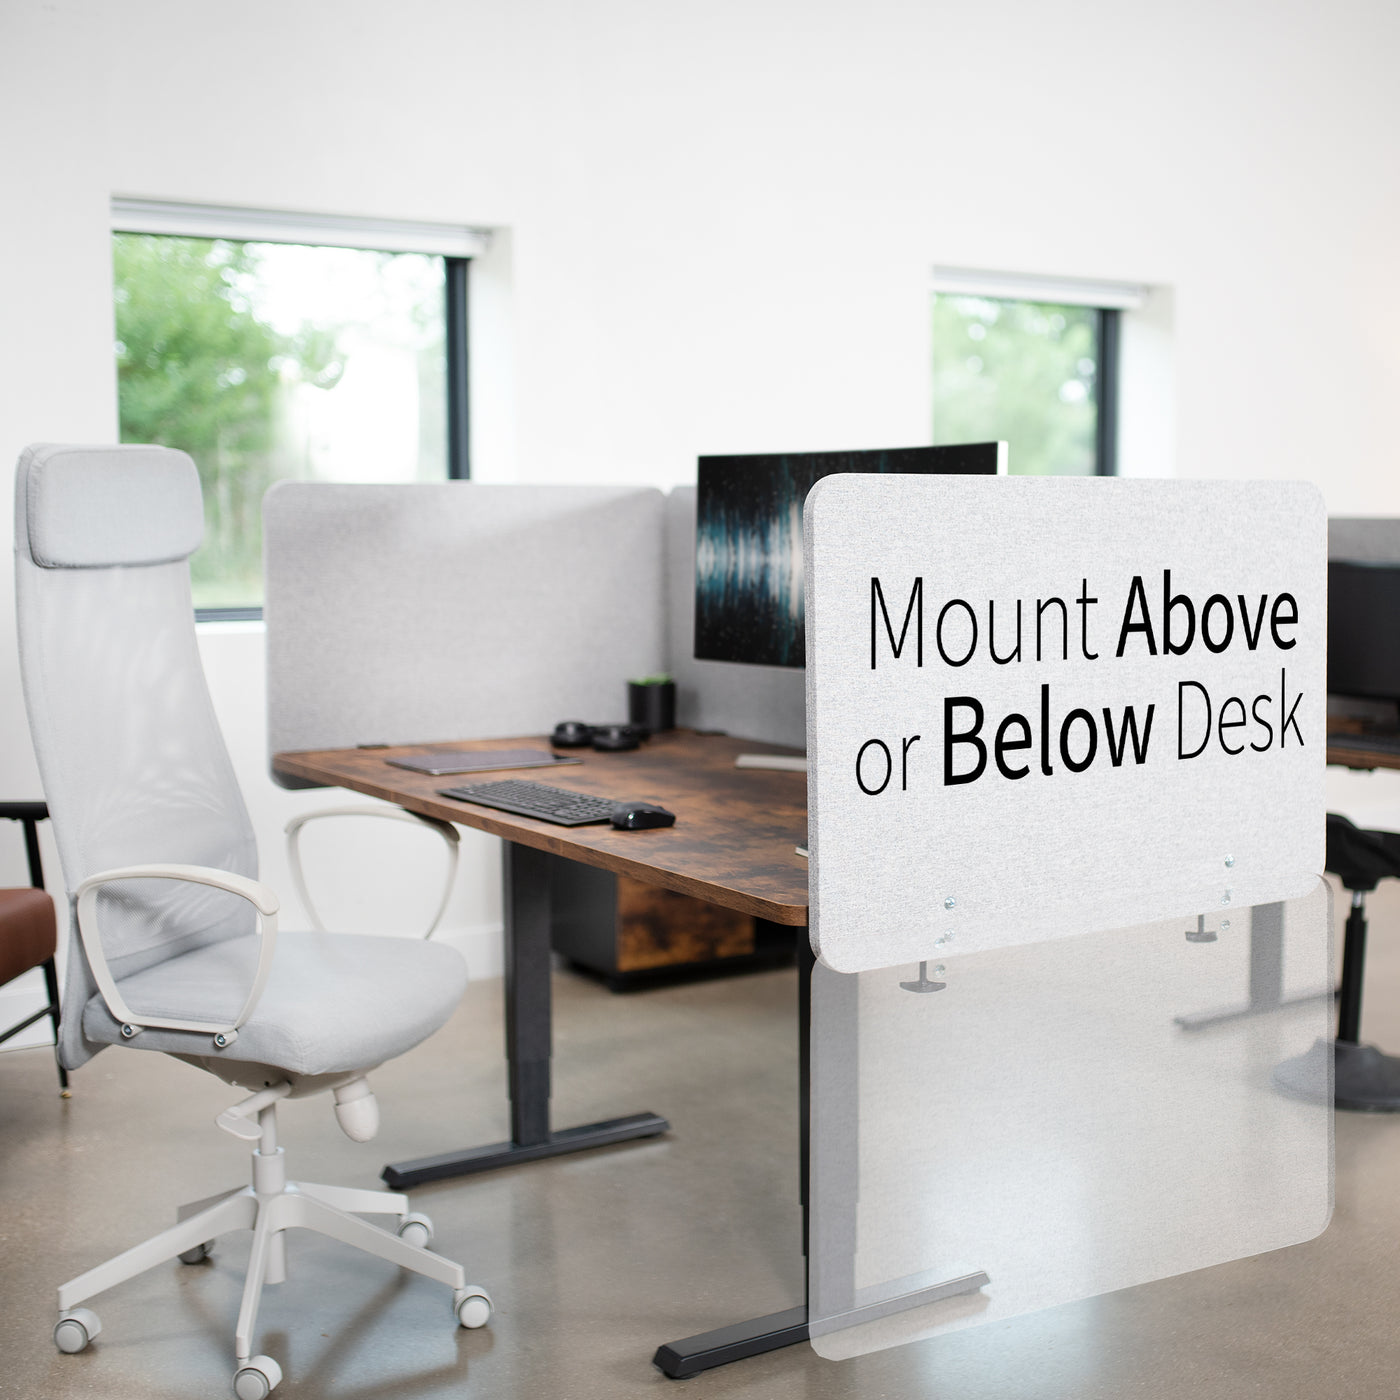 Clamp-on desk privacy panel for office workspace that mounts above desk or below desk.